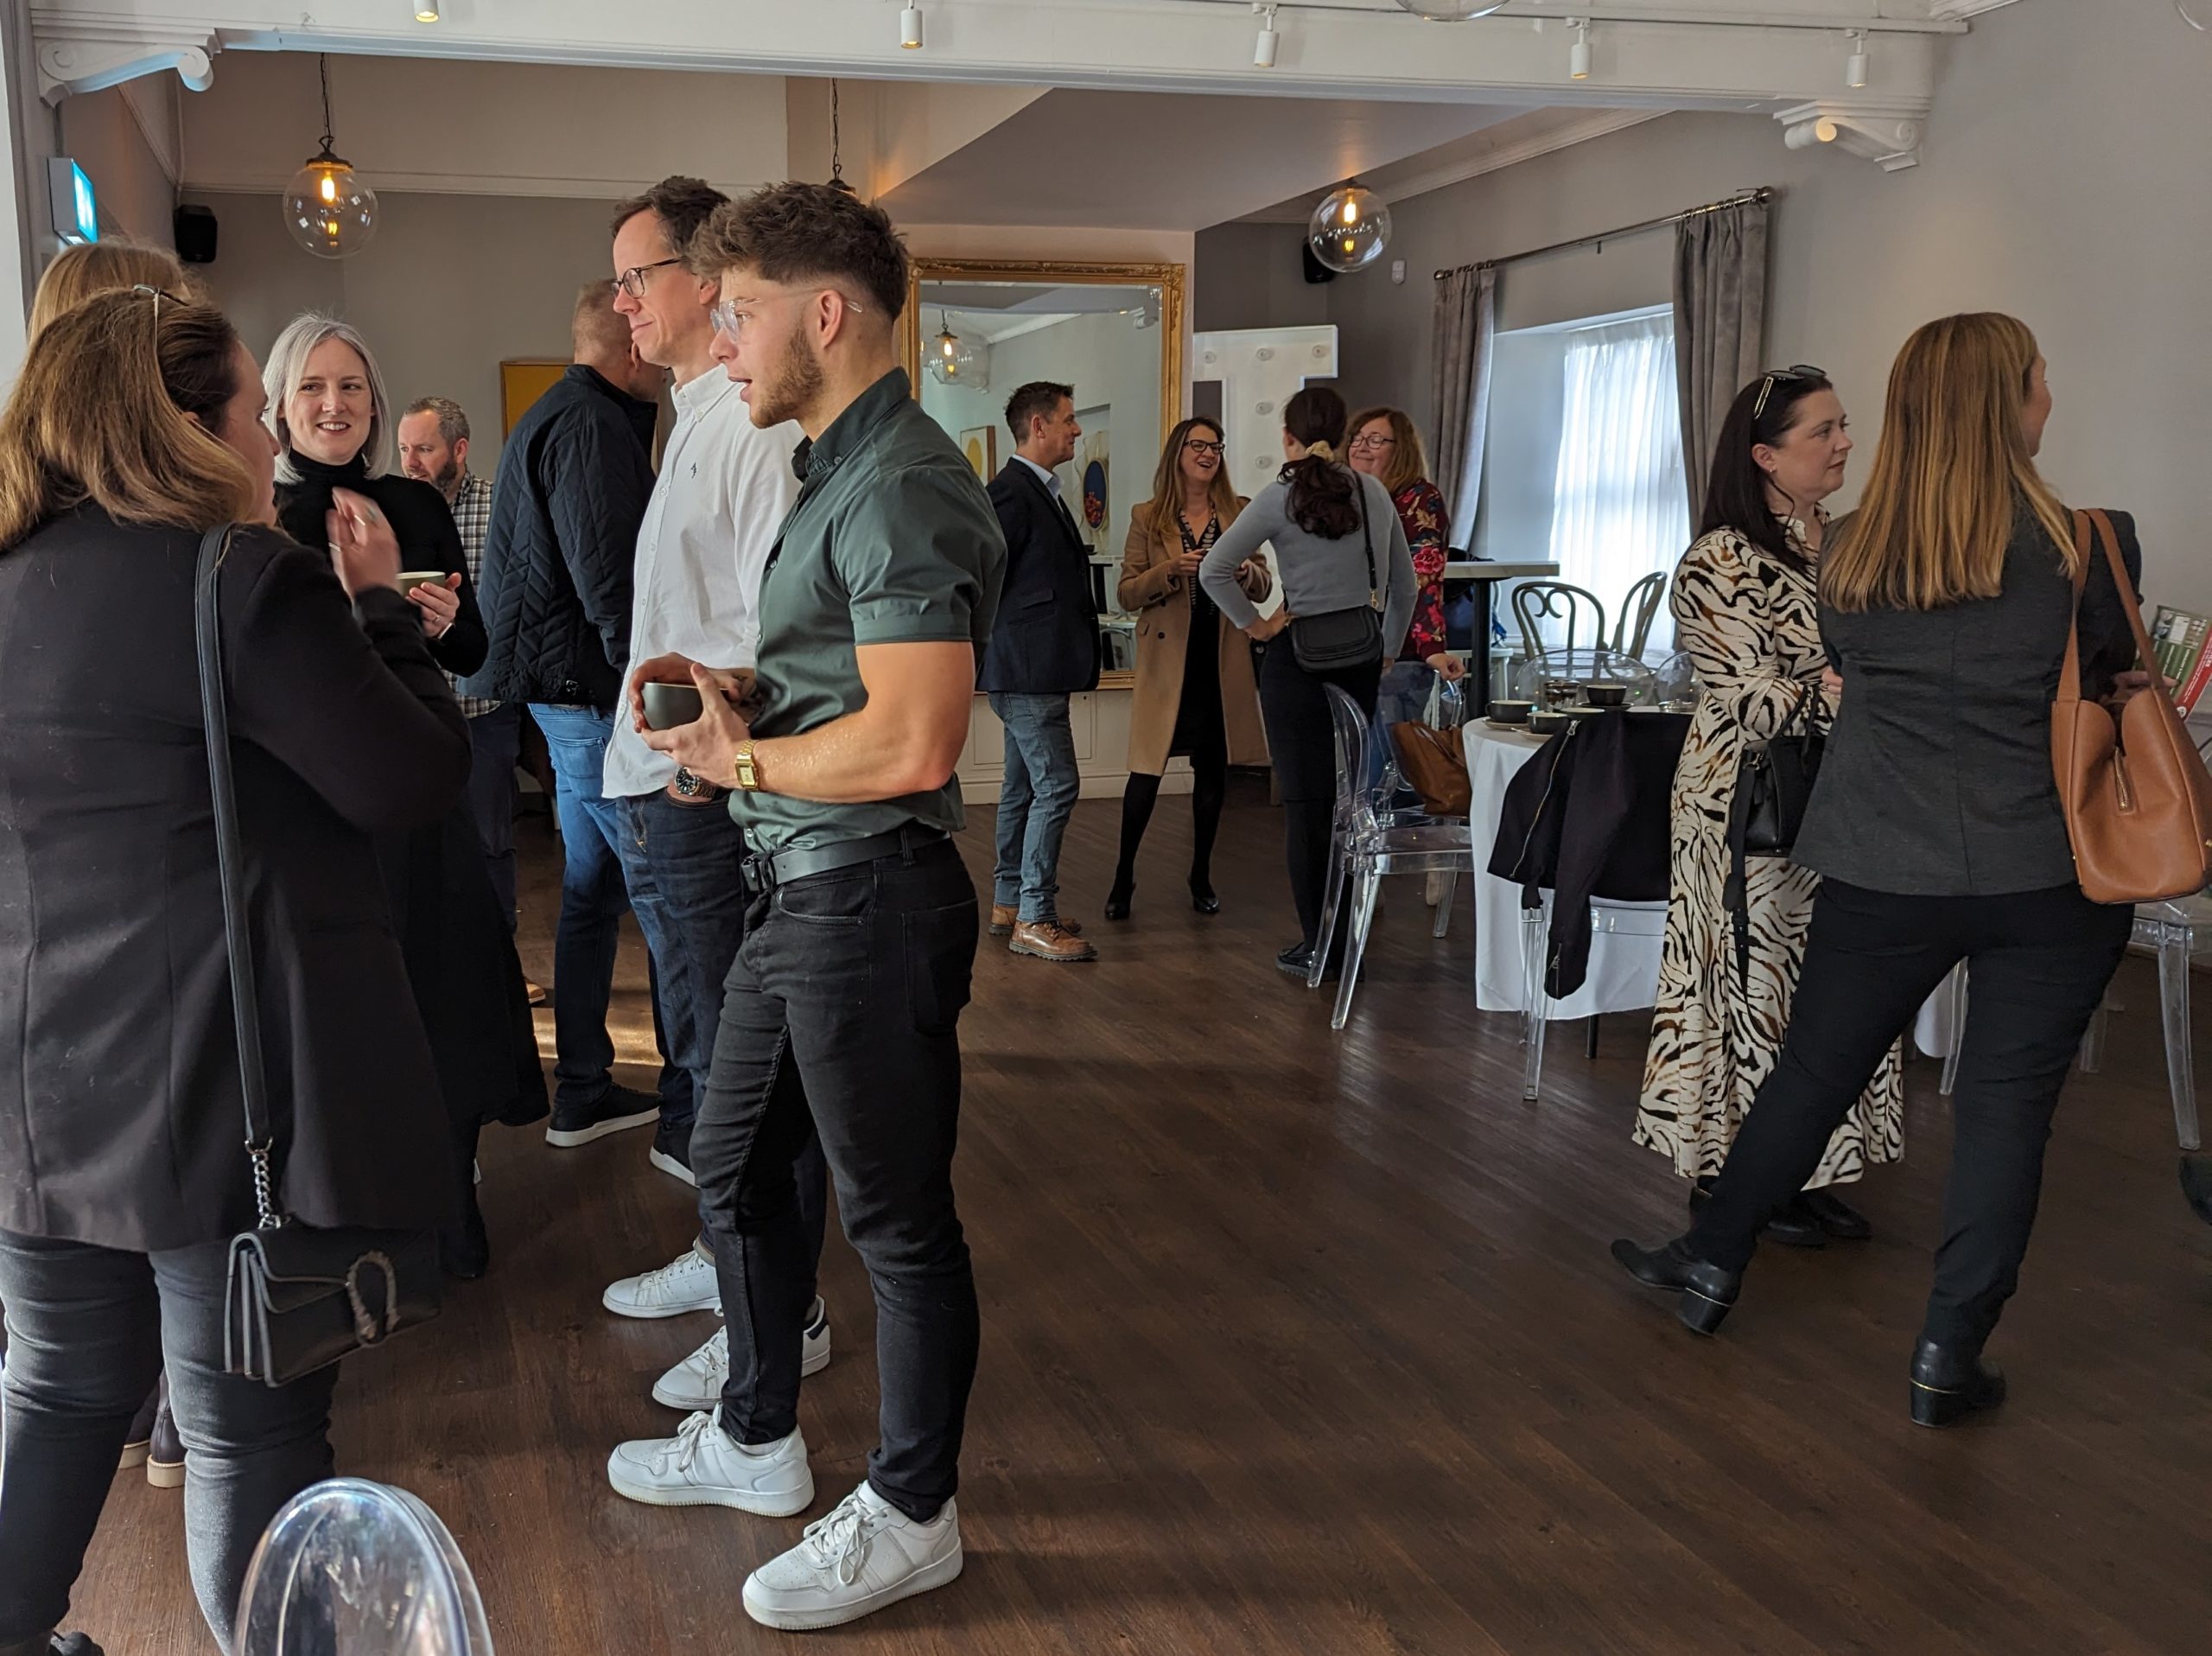 Book your place at West Kirby’s free business networking event